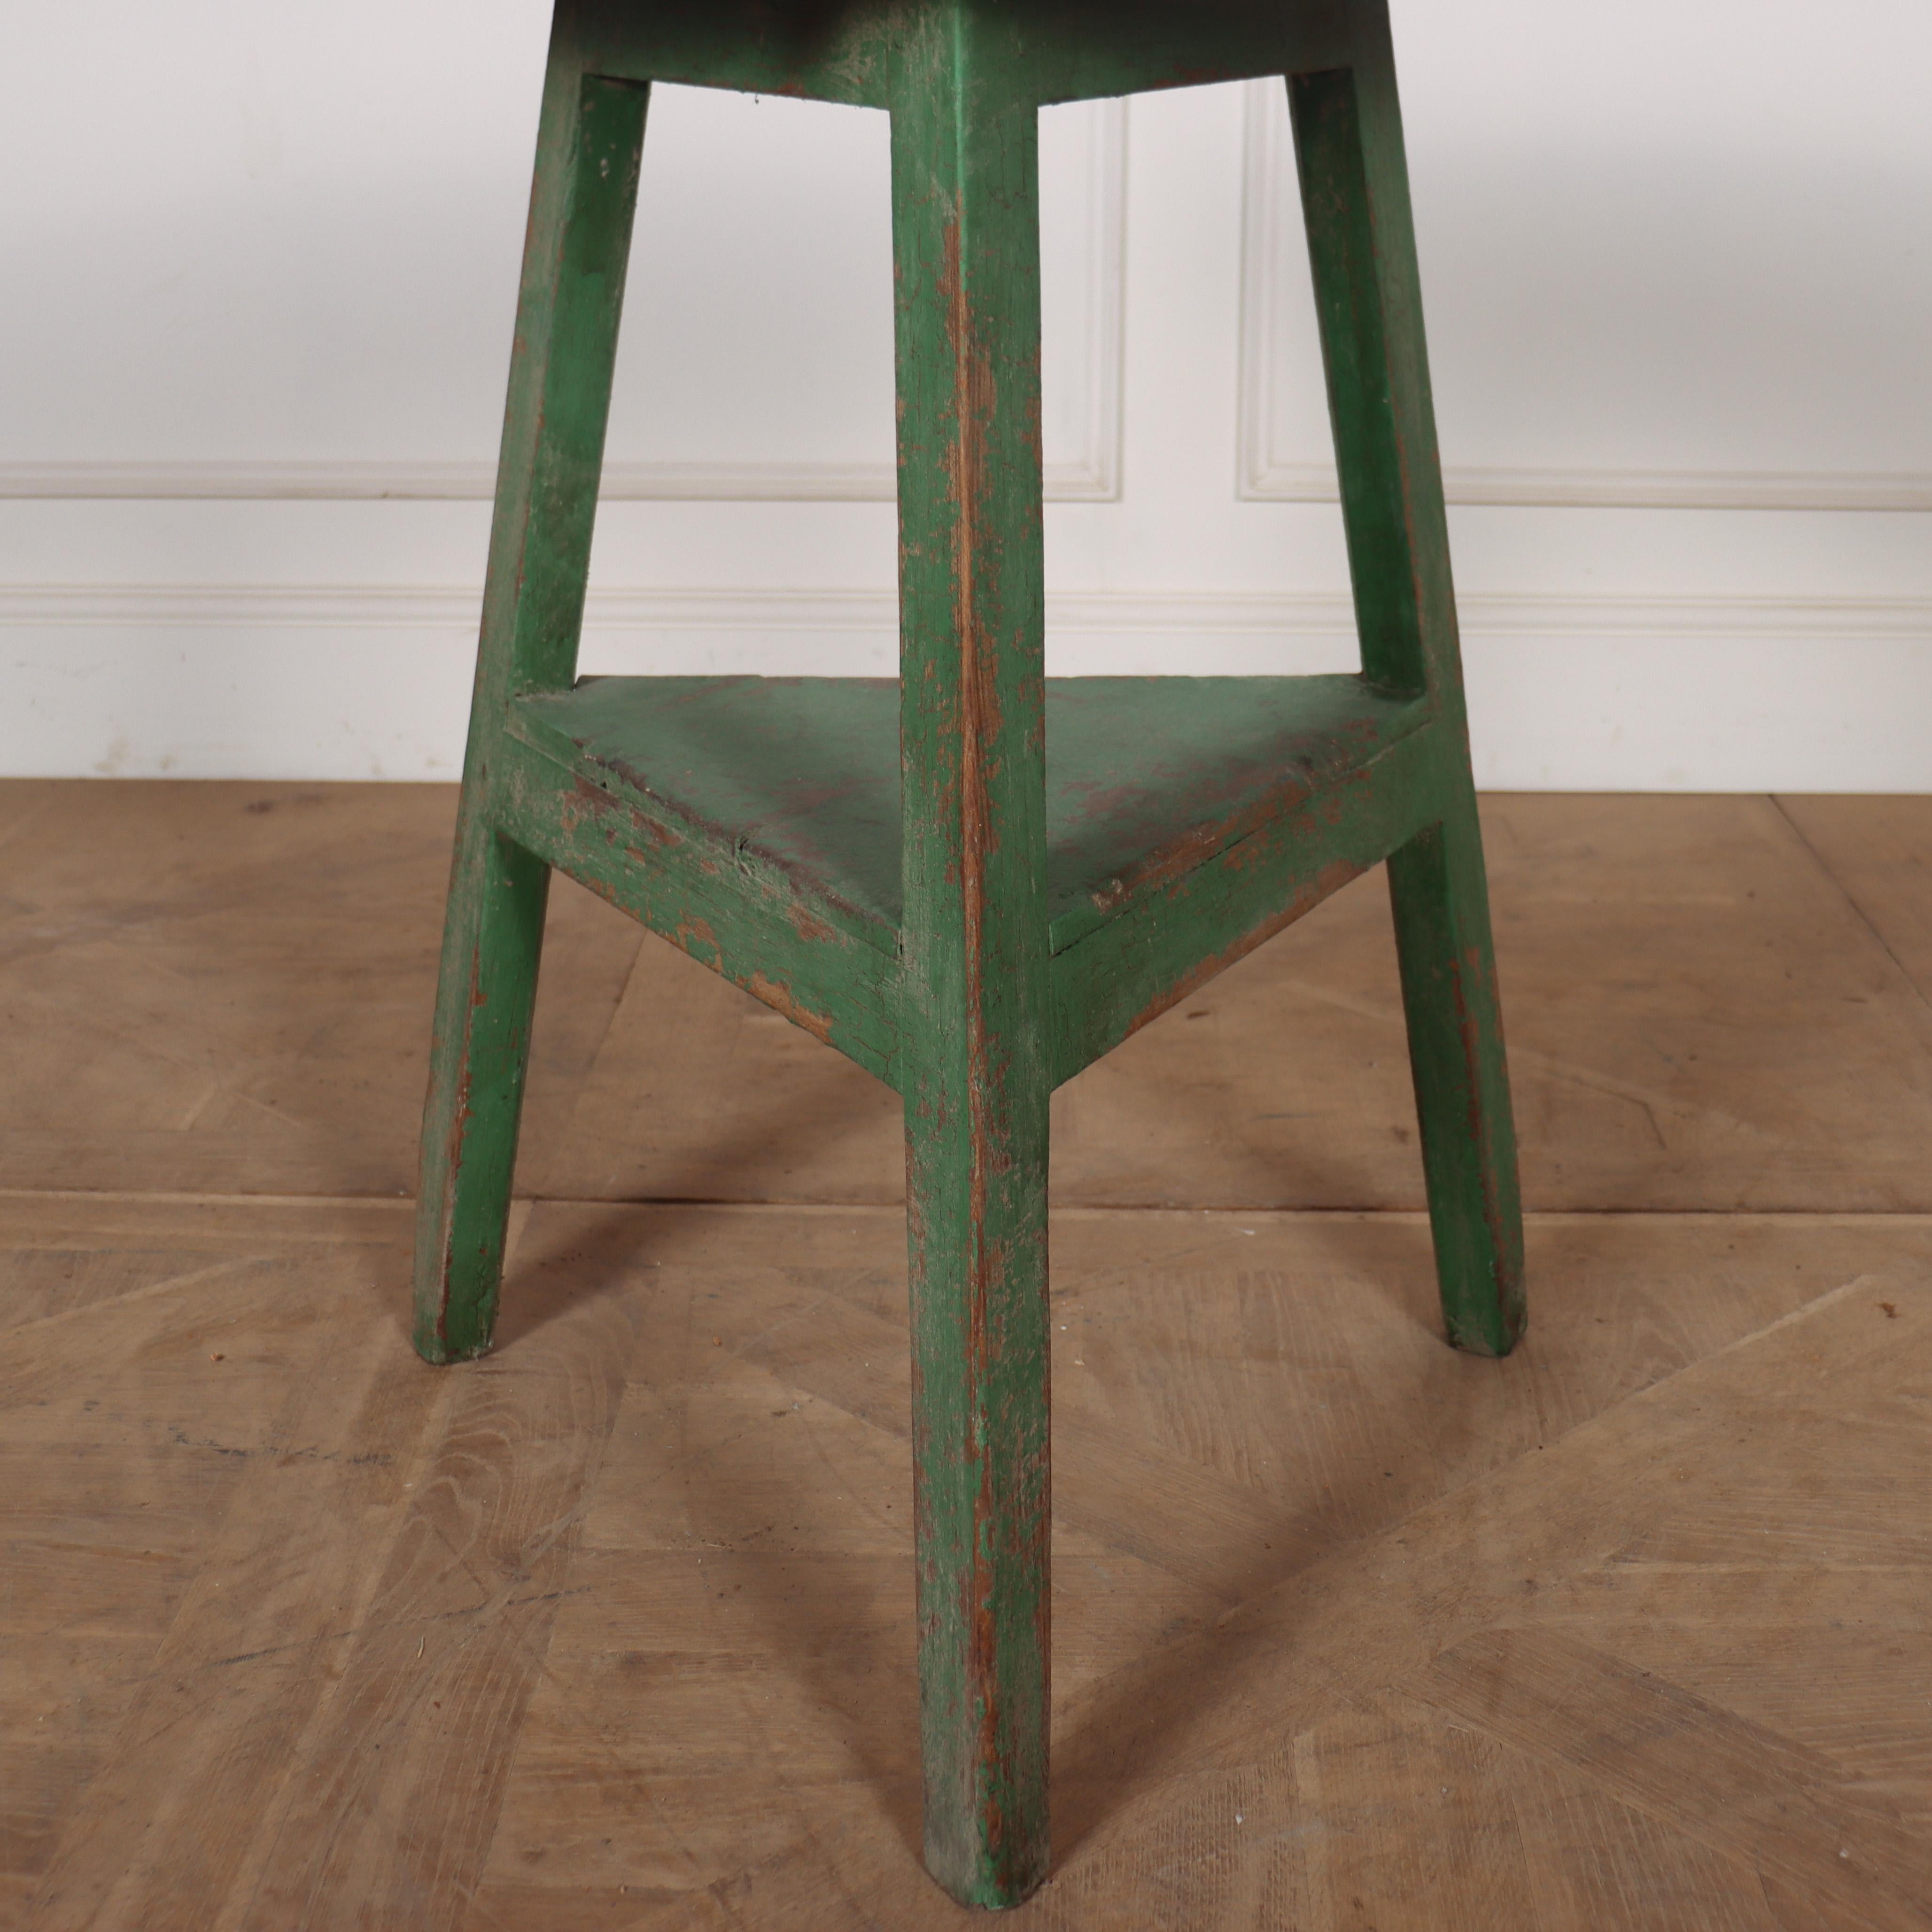 19th C Welsh painted pine cricket table. 1840.

Reference: 8108

Dimensions
30.5 inches (77 cms) High
21 inches (53 cms) Diameter